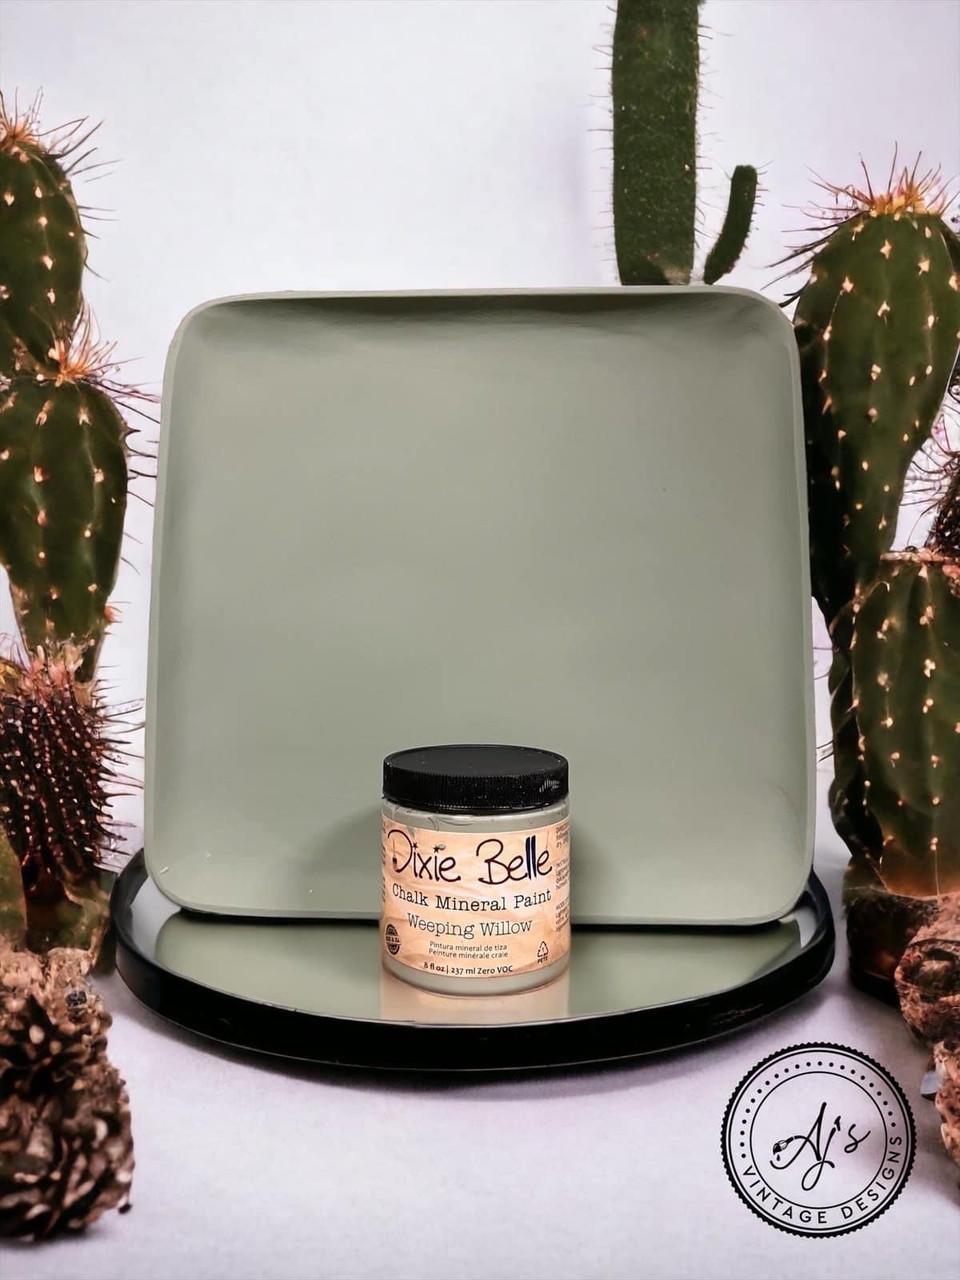 Dixie Belle Mineral Paint | Weeping Willow - Softgrün - Lioness Vintage